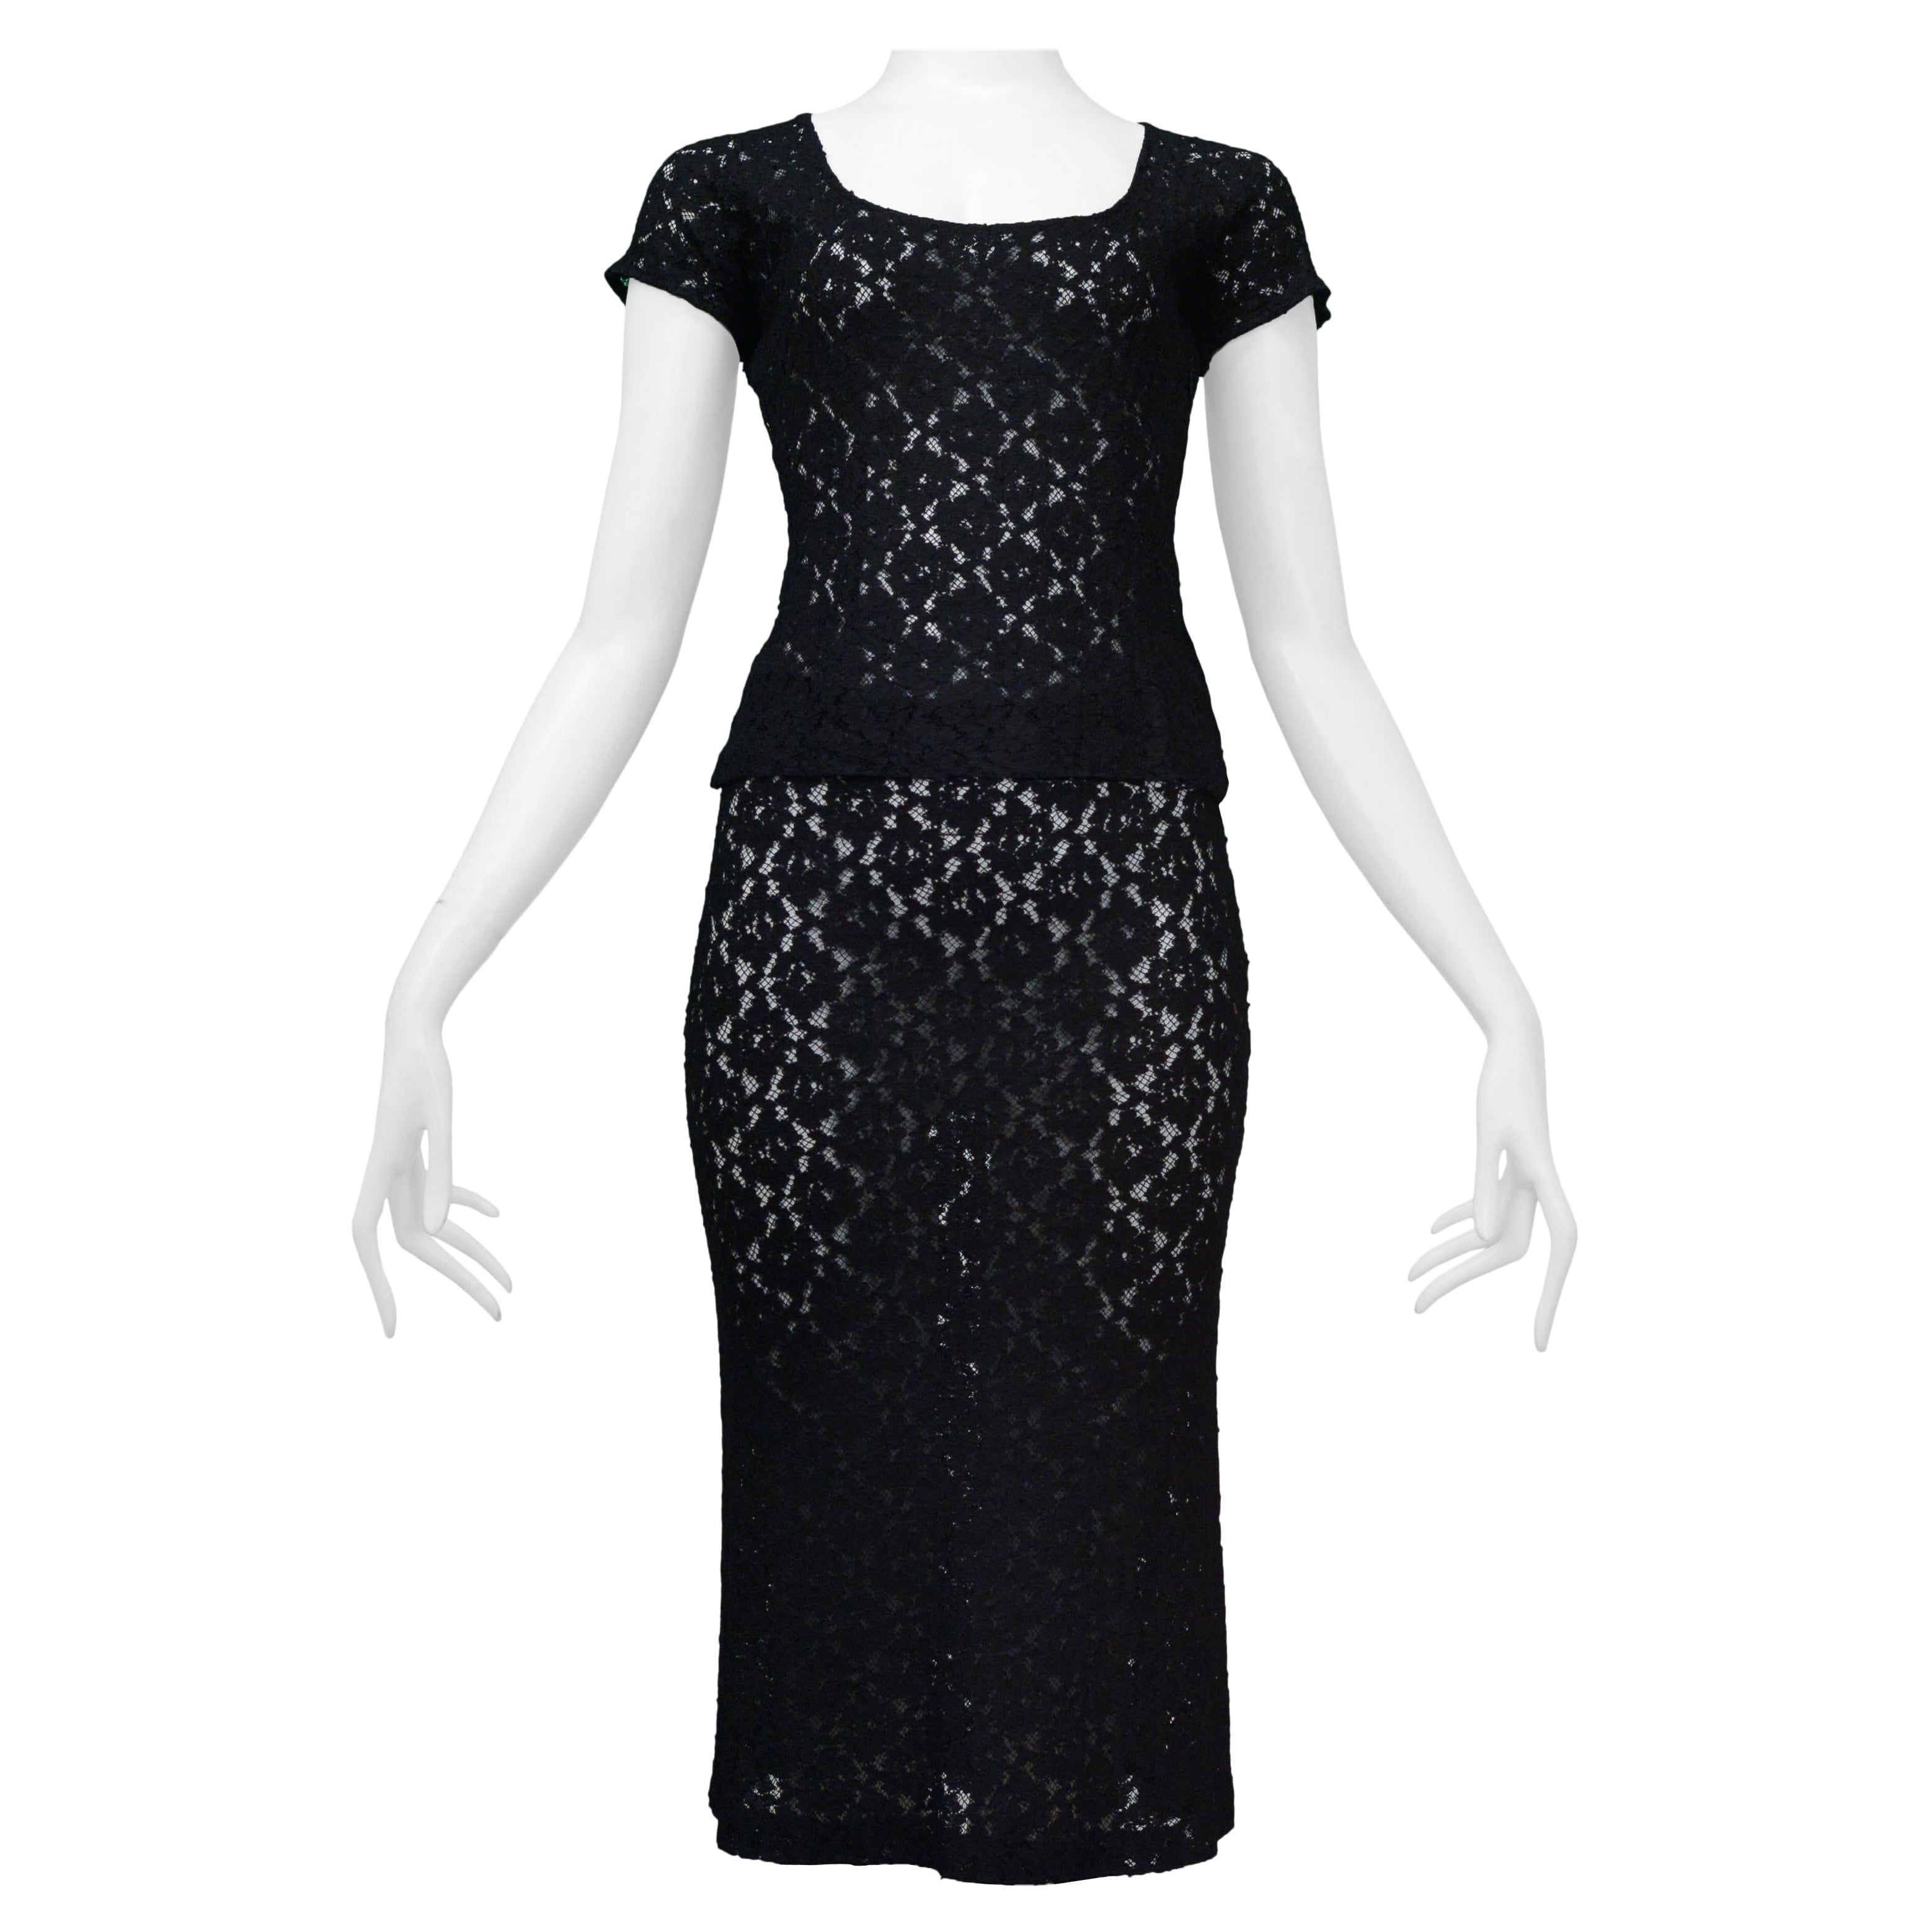 Dolce & Gabbana Black Floral Lace Top And Skirt Ensemble 1990s For Sale